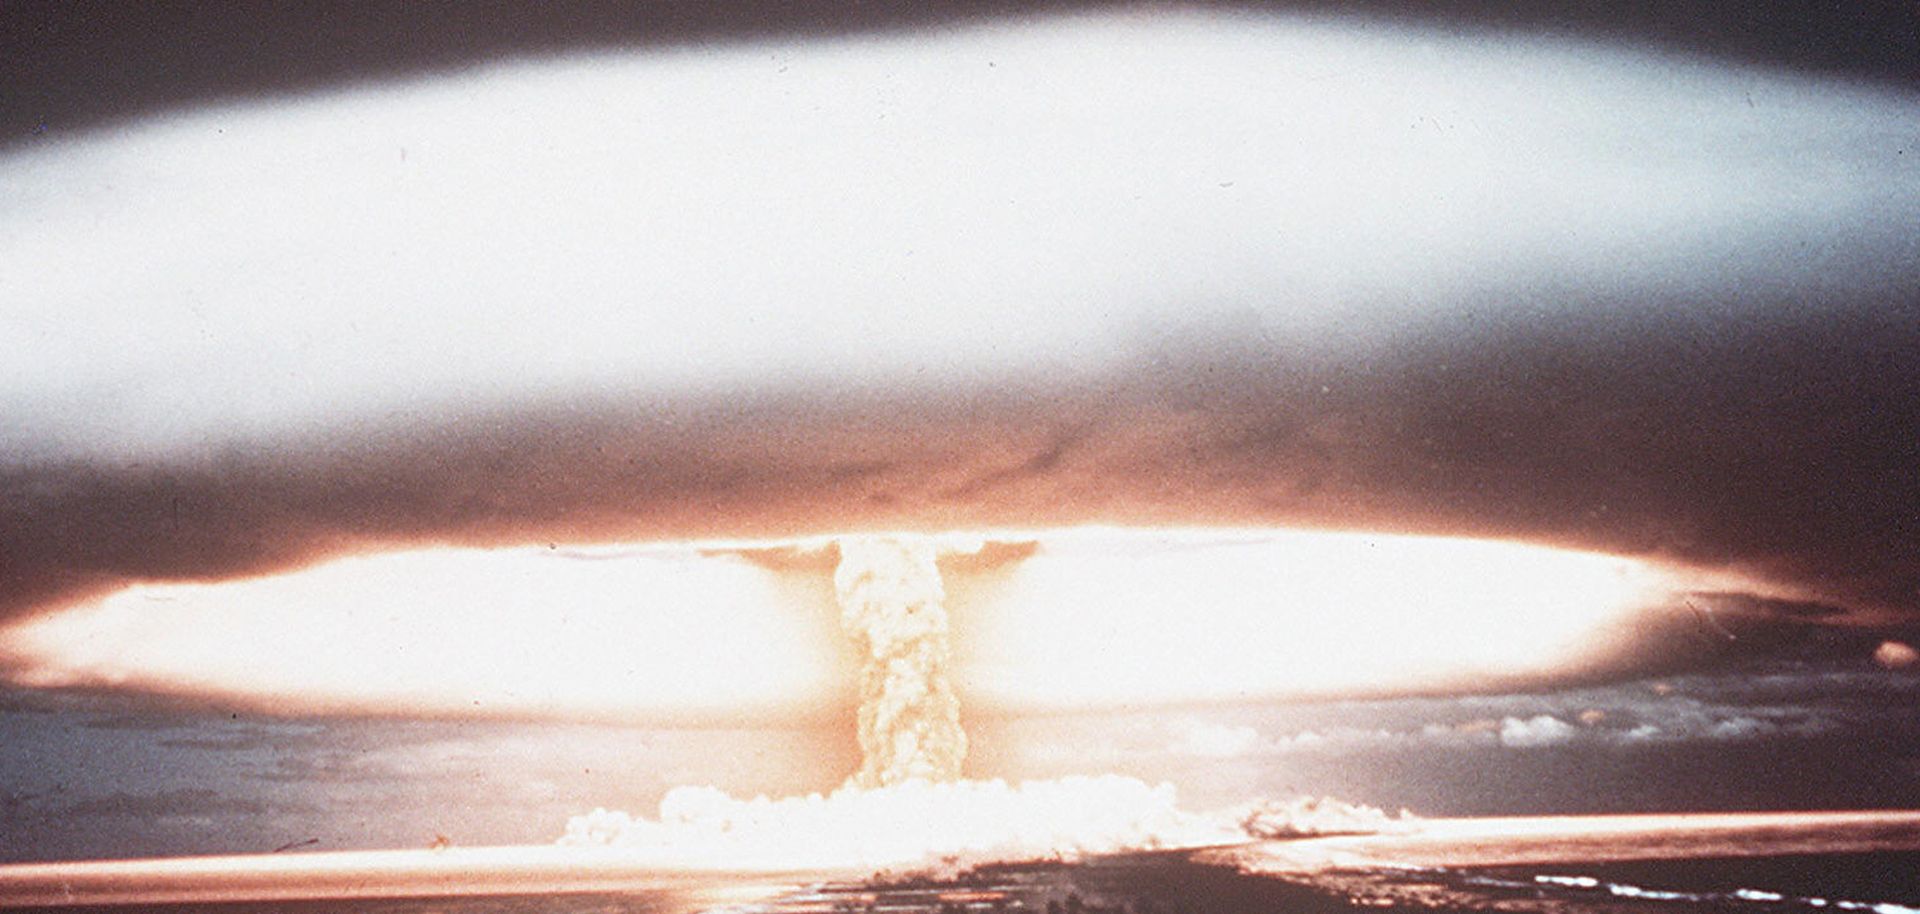 To think that nuclear weapons, or even war, might one day be abolished is somewhat naive.